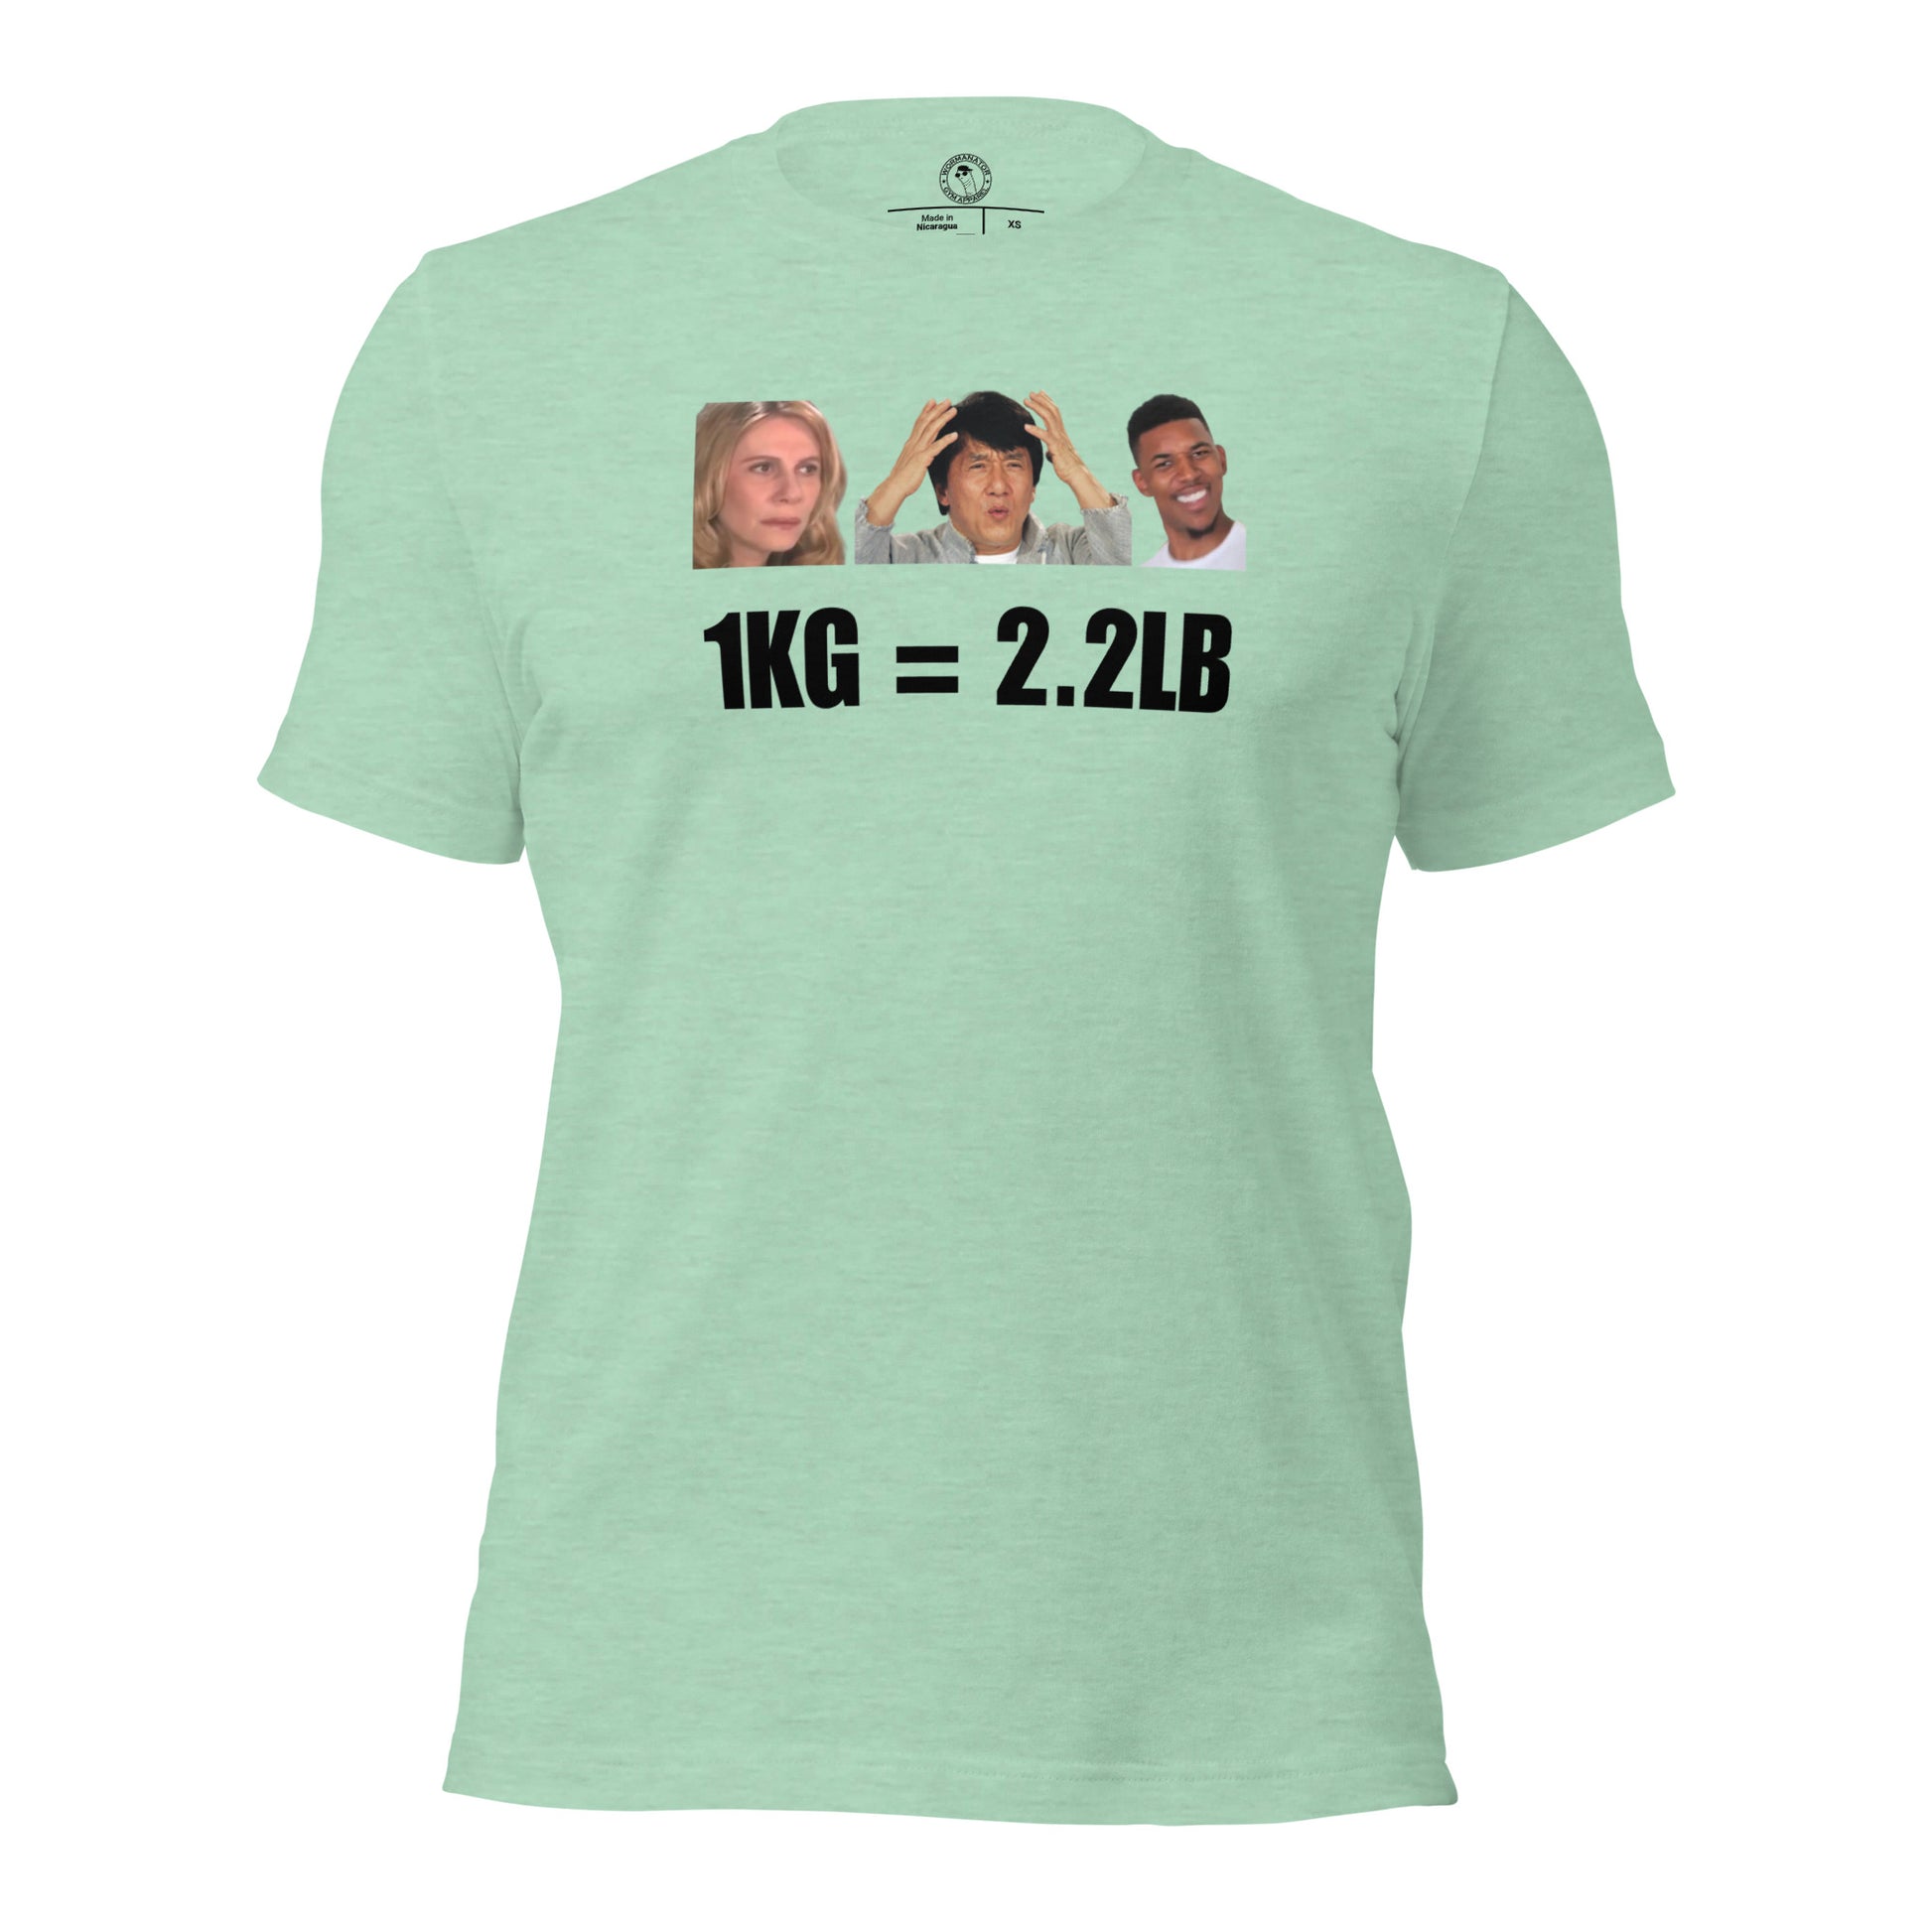 1kg = 2.2lb Powerlifting Conversion Shirt in Heather Prism Mint